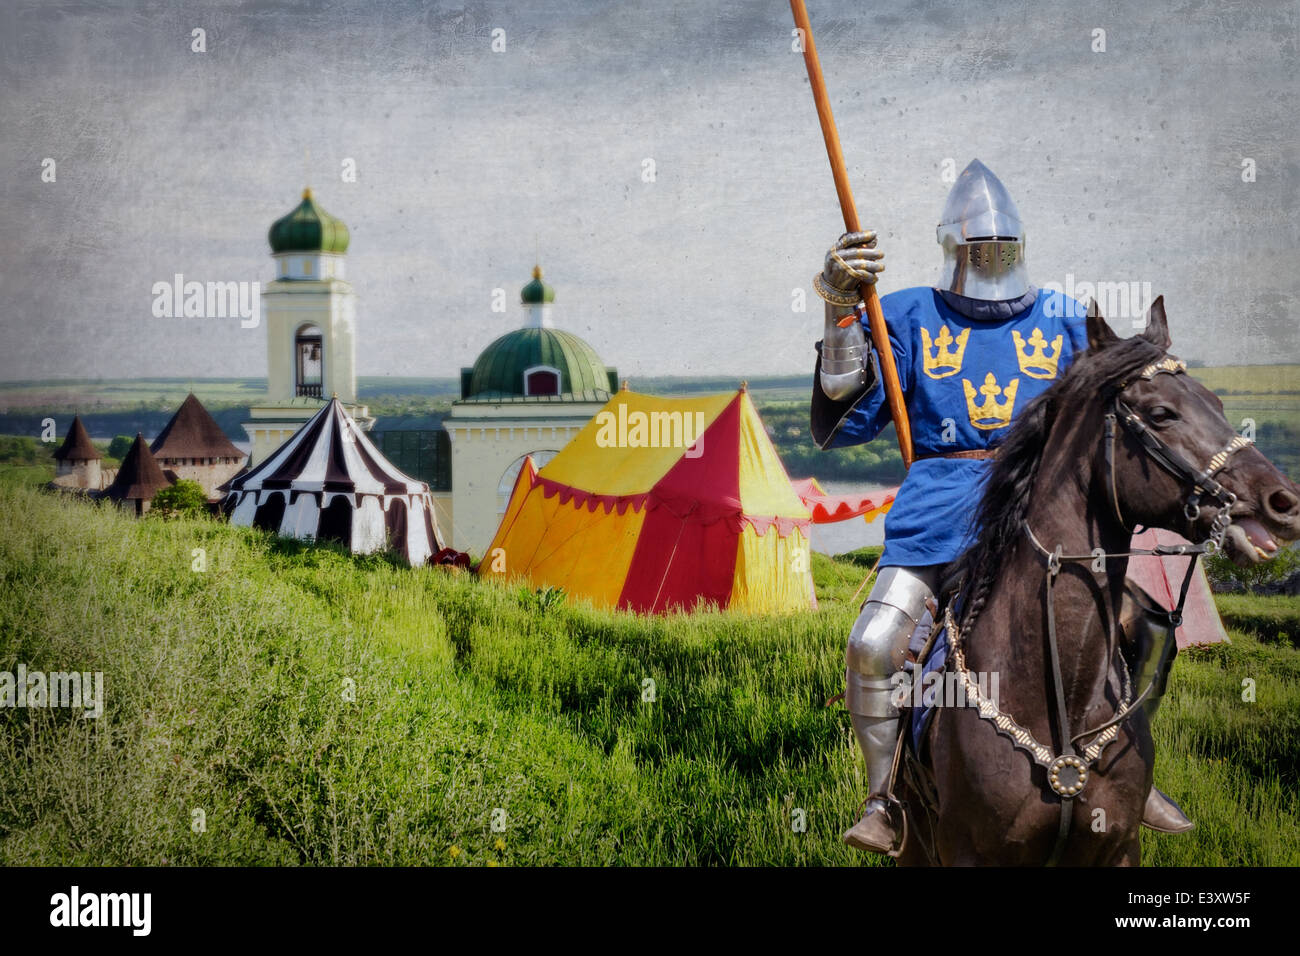 Armored knight on warhorse over old medieval castle and camp Stock Photo